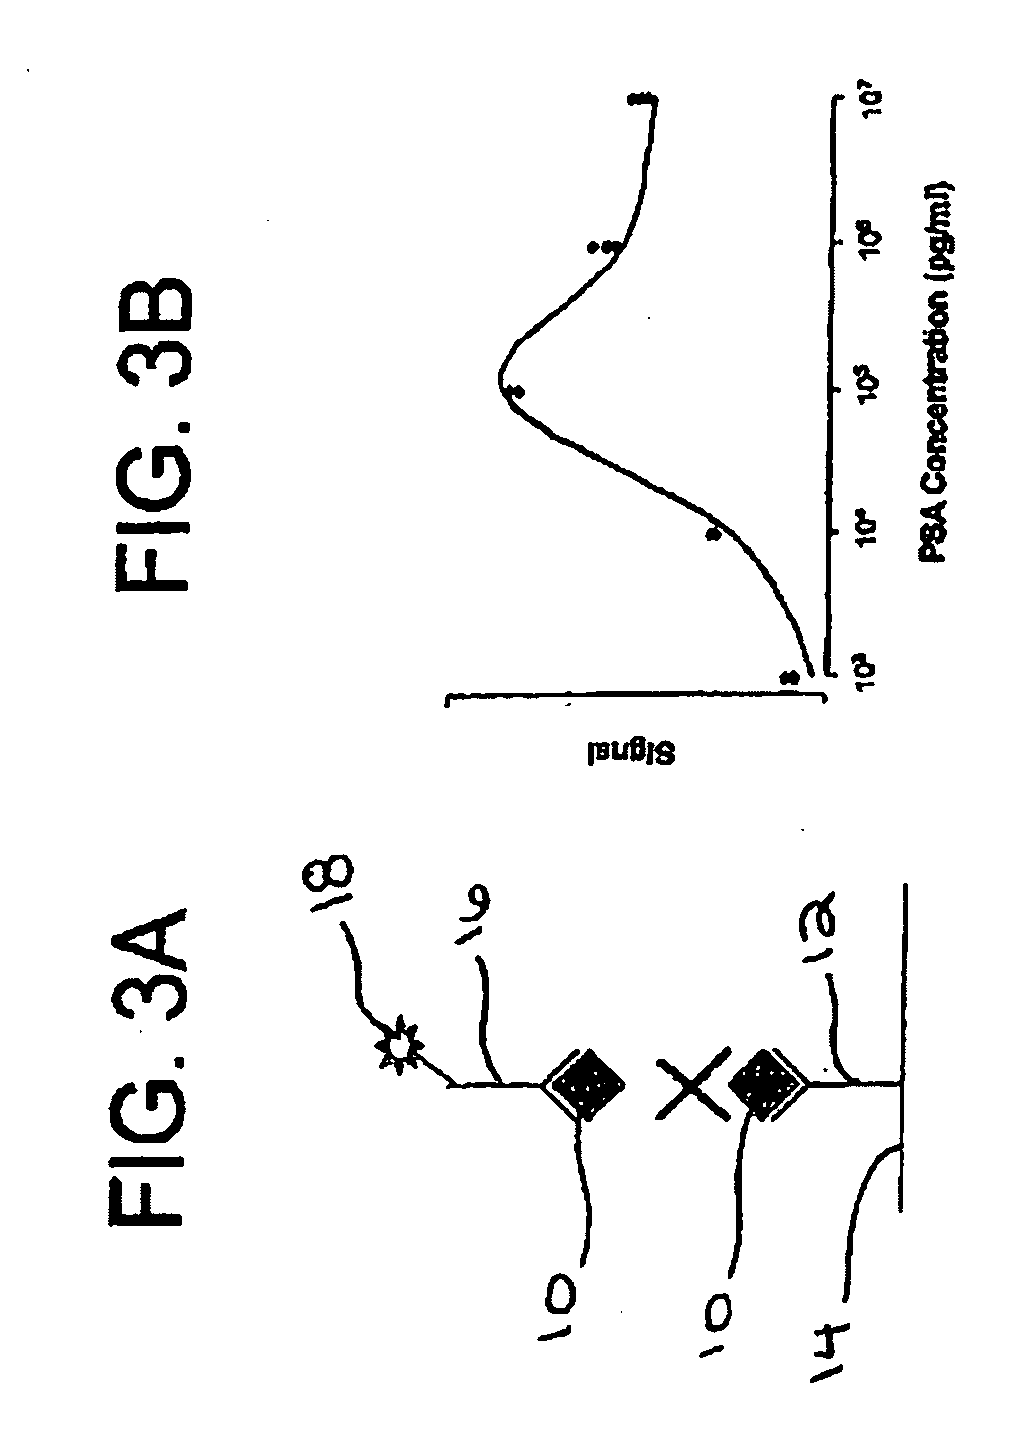 Methods of controlling the sensitivity and dynamic range of a homogeneous assay